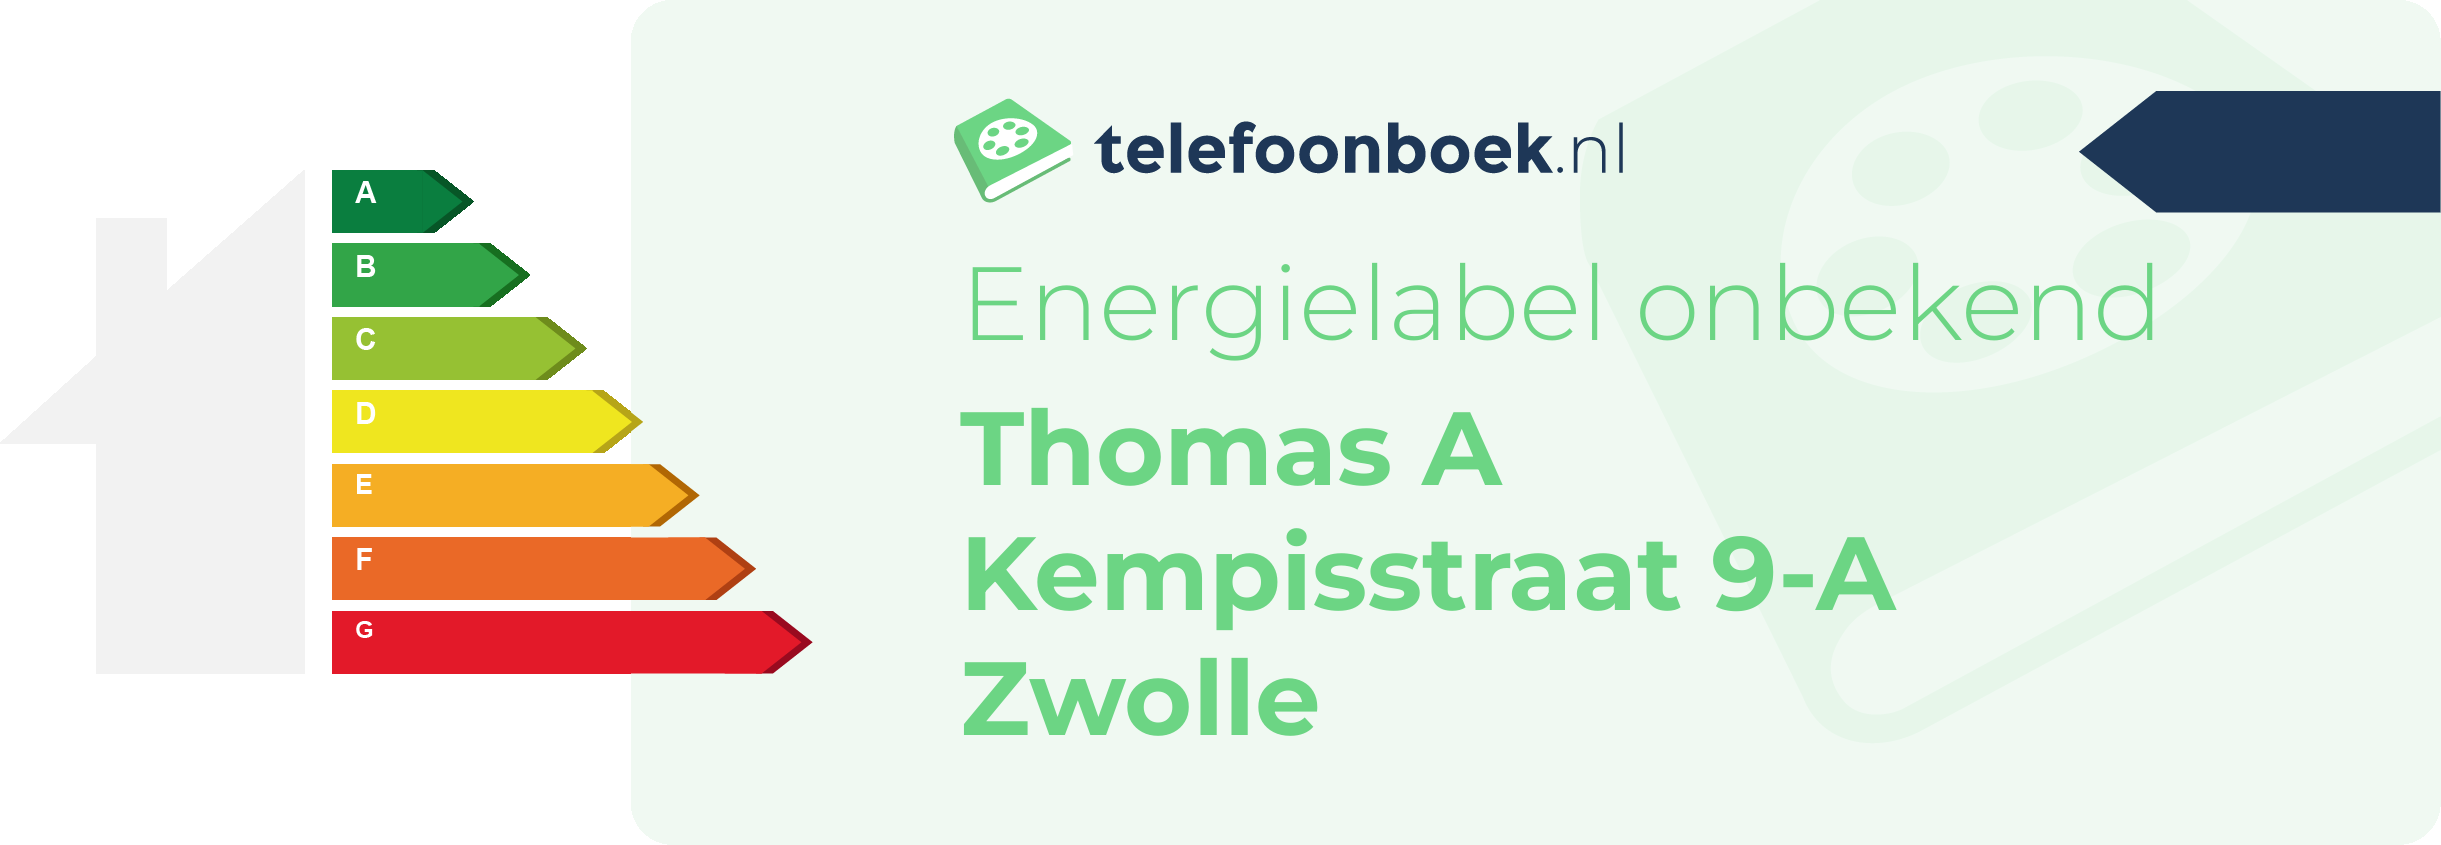 Energielabel Thomas A Kempisstraat 9-A Zwolle